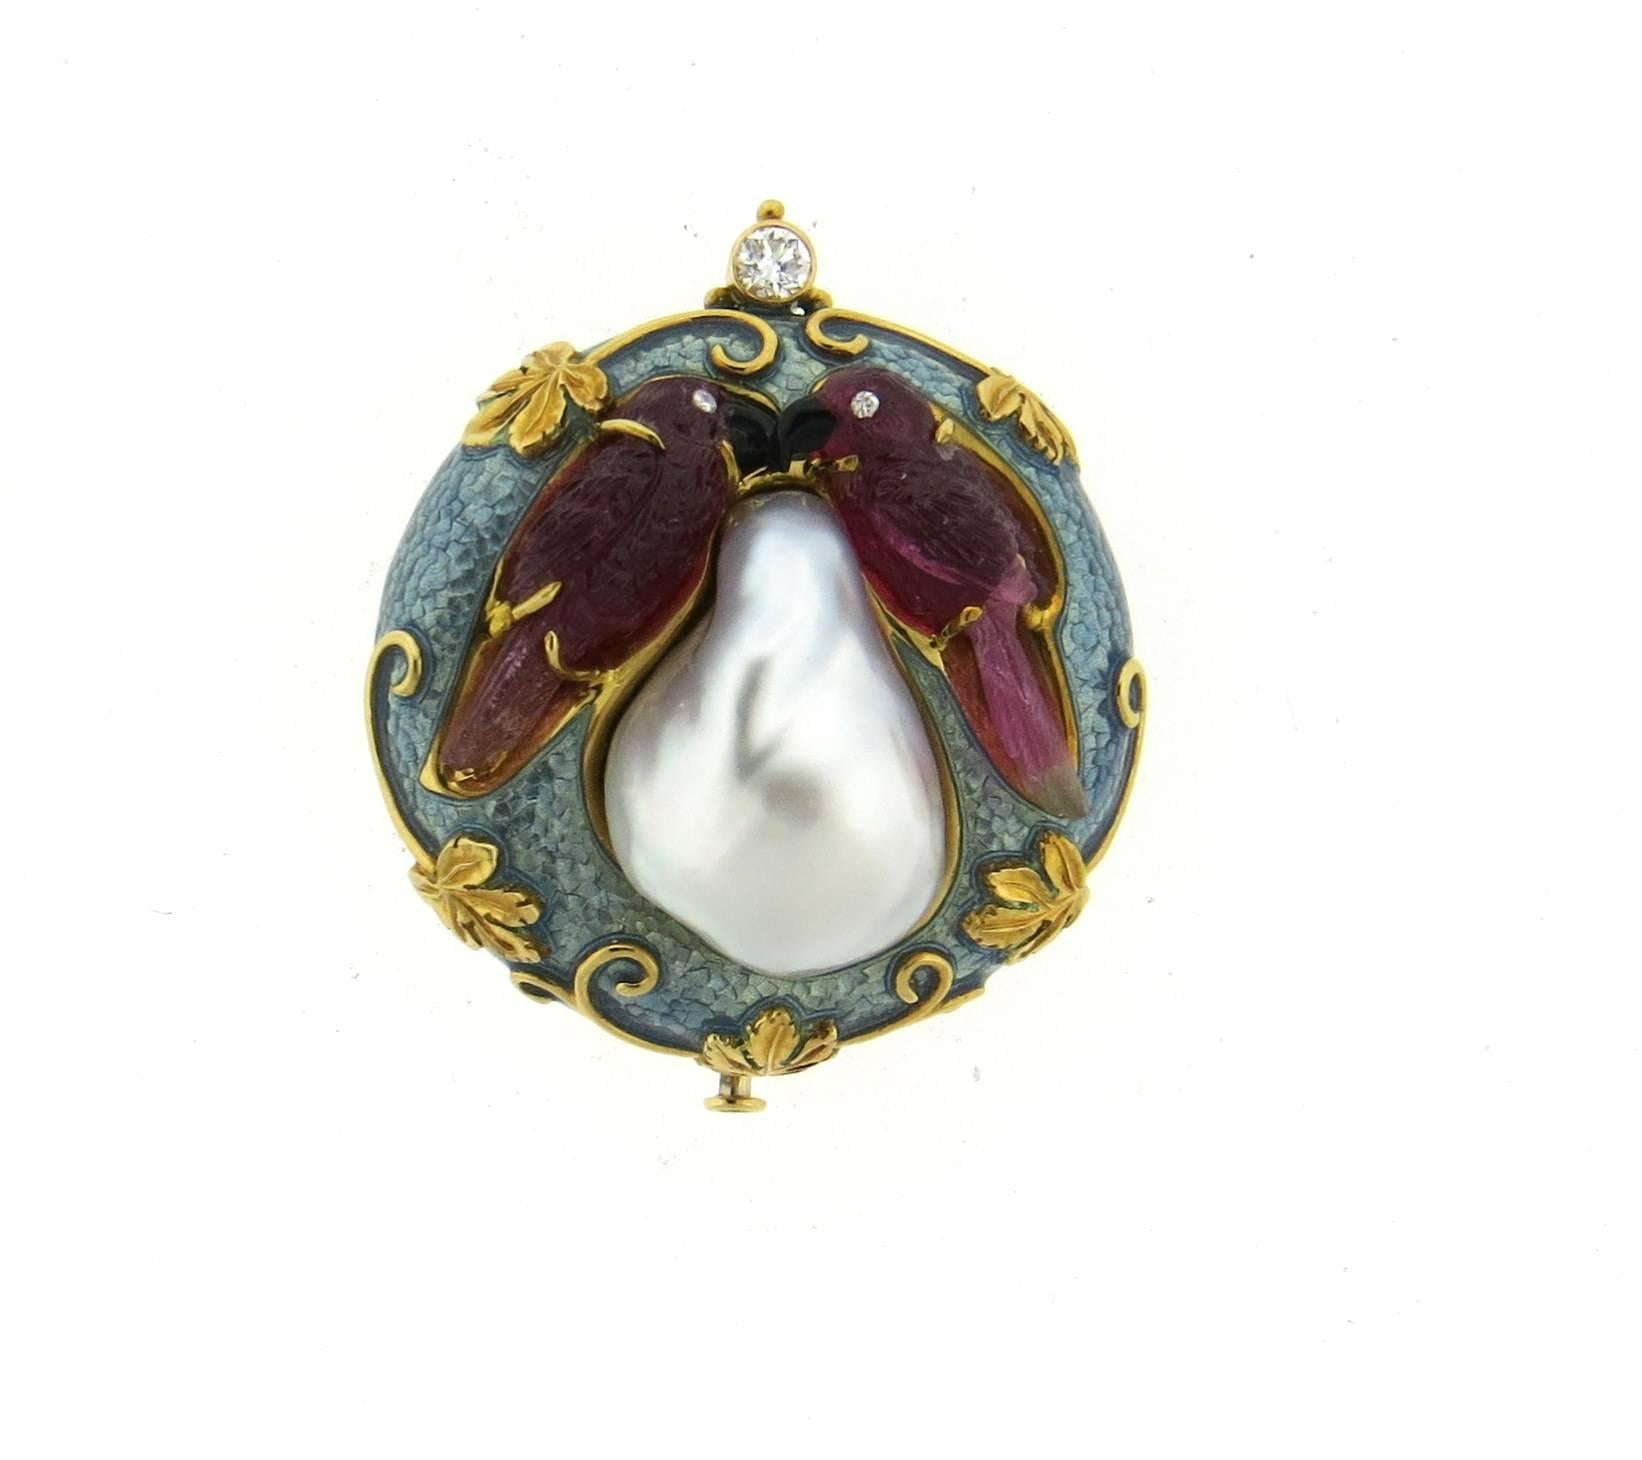 Exquisite and rare 18k yellow gold brooch, crafted by Elizabeth Gage, decorated with carved gemstone birds, 23mm x 16mm baroque pearl, enamel and approximately 0.21ctw in diamonds.Brooch is 36mm x 40mm. Marked: Gage, English gold assay marks .